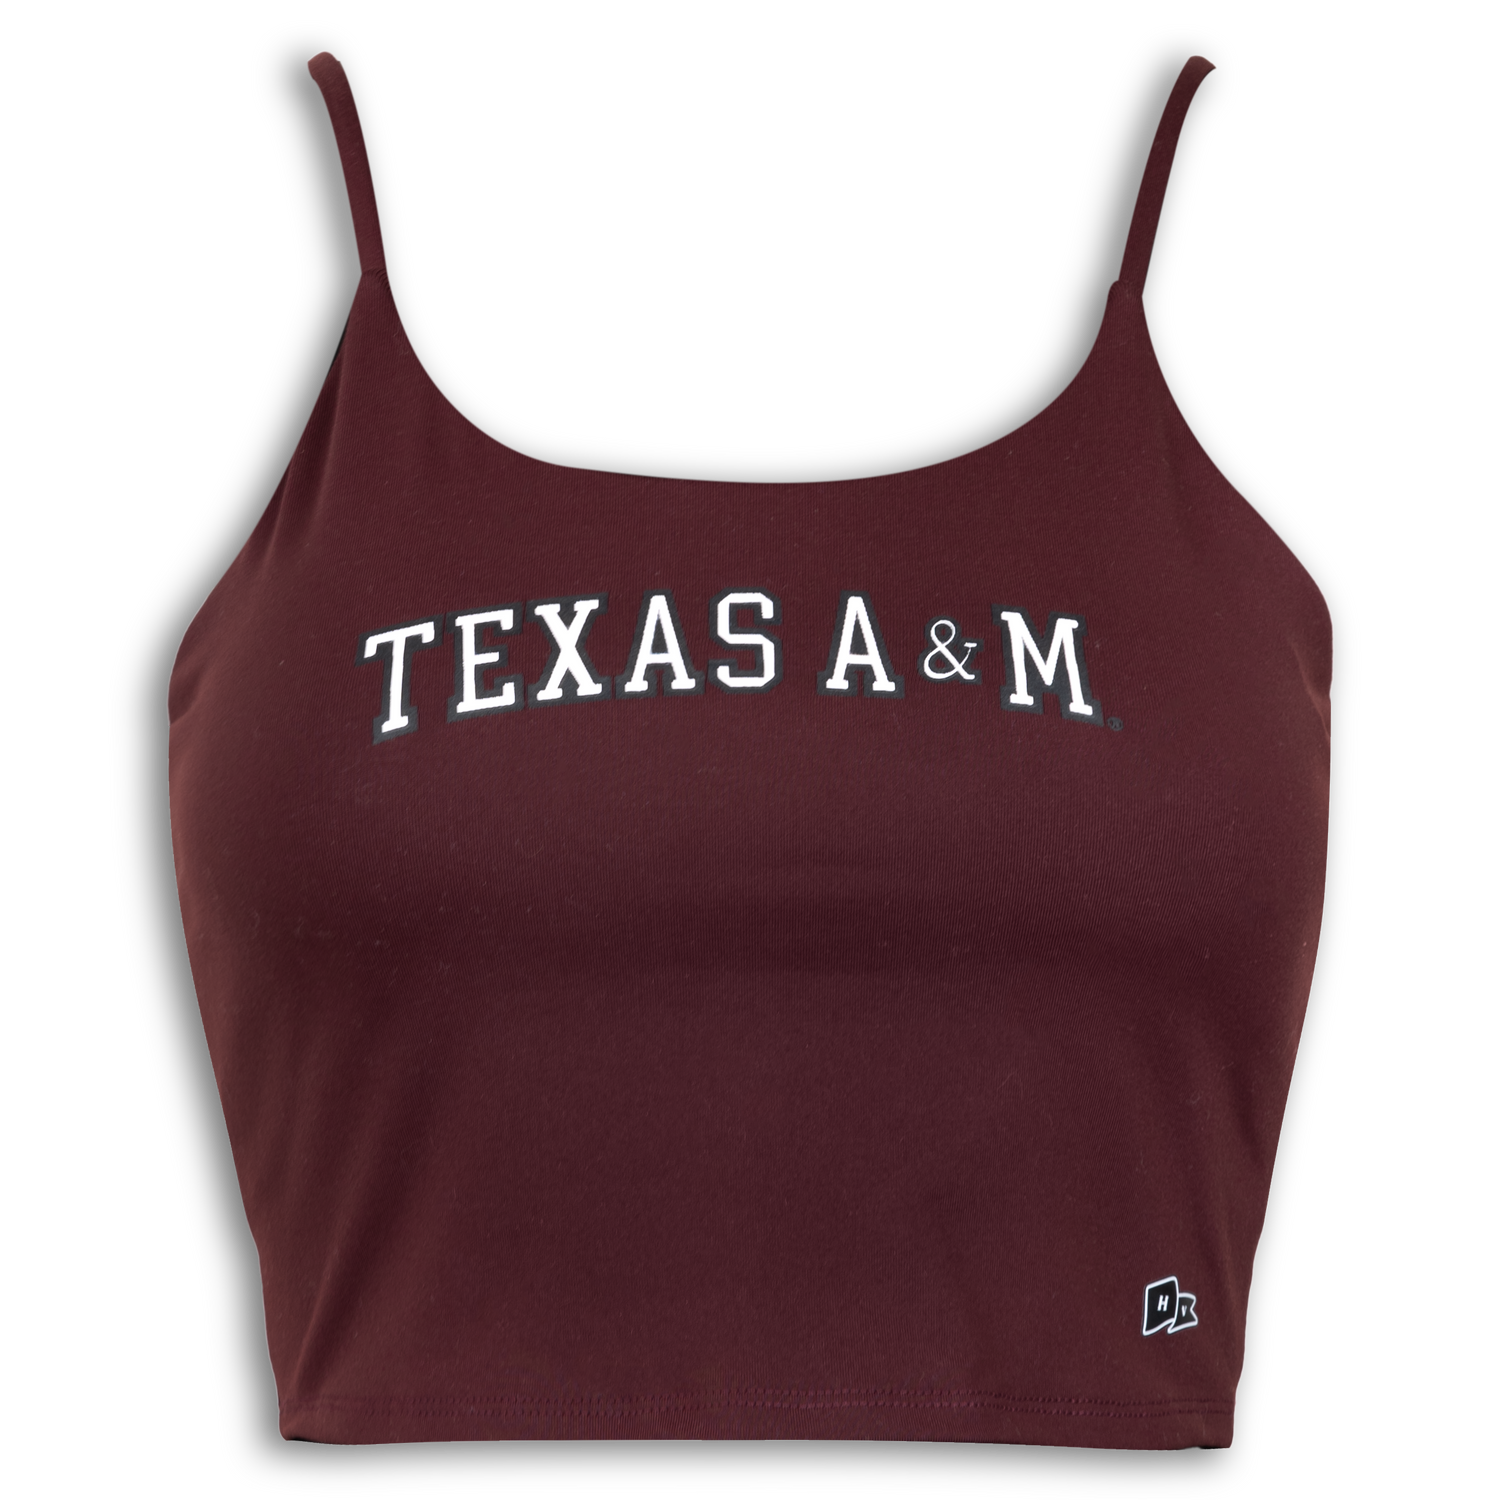 Texas A&M Hype and Vice Maroon Bra Tank Top